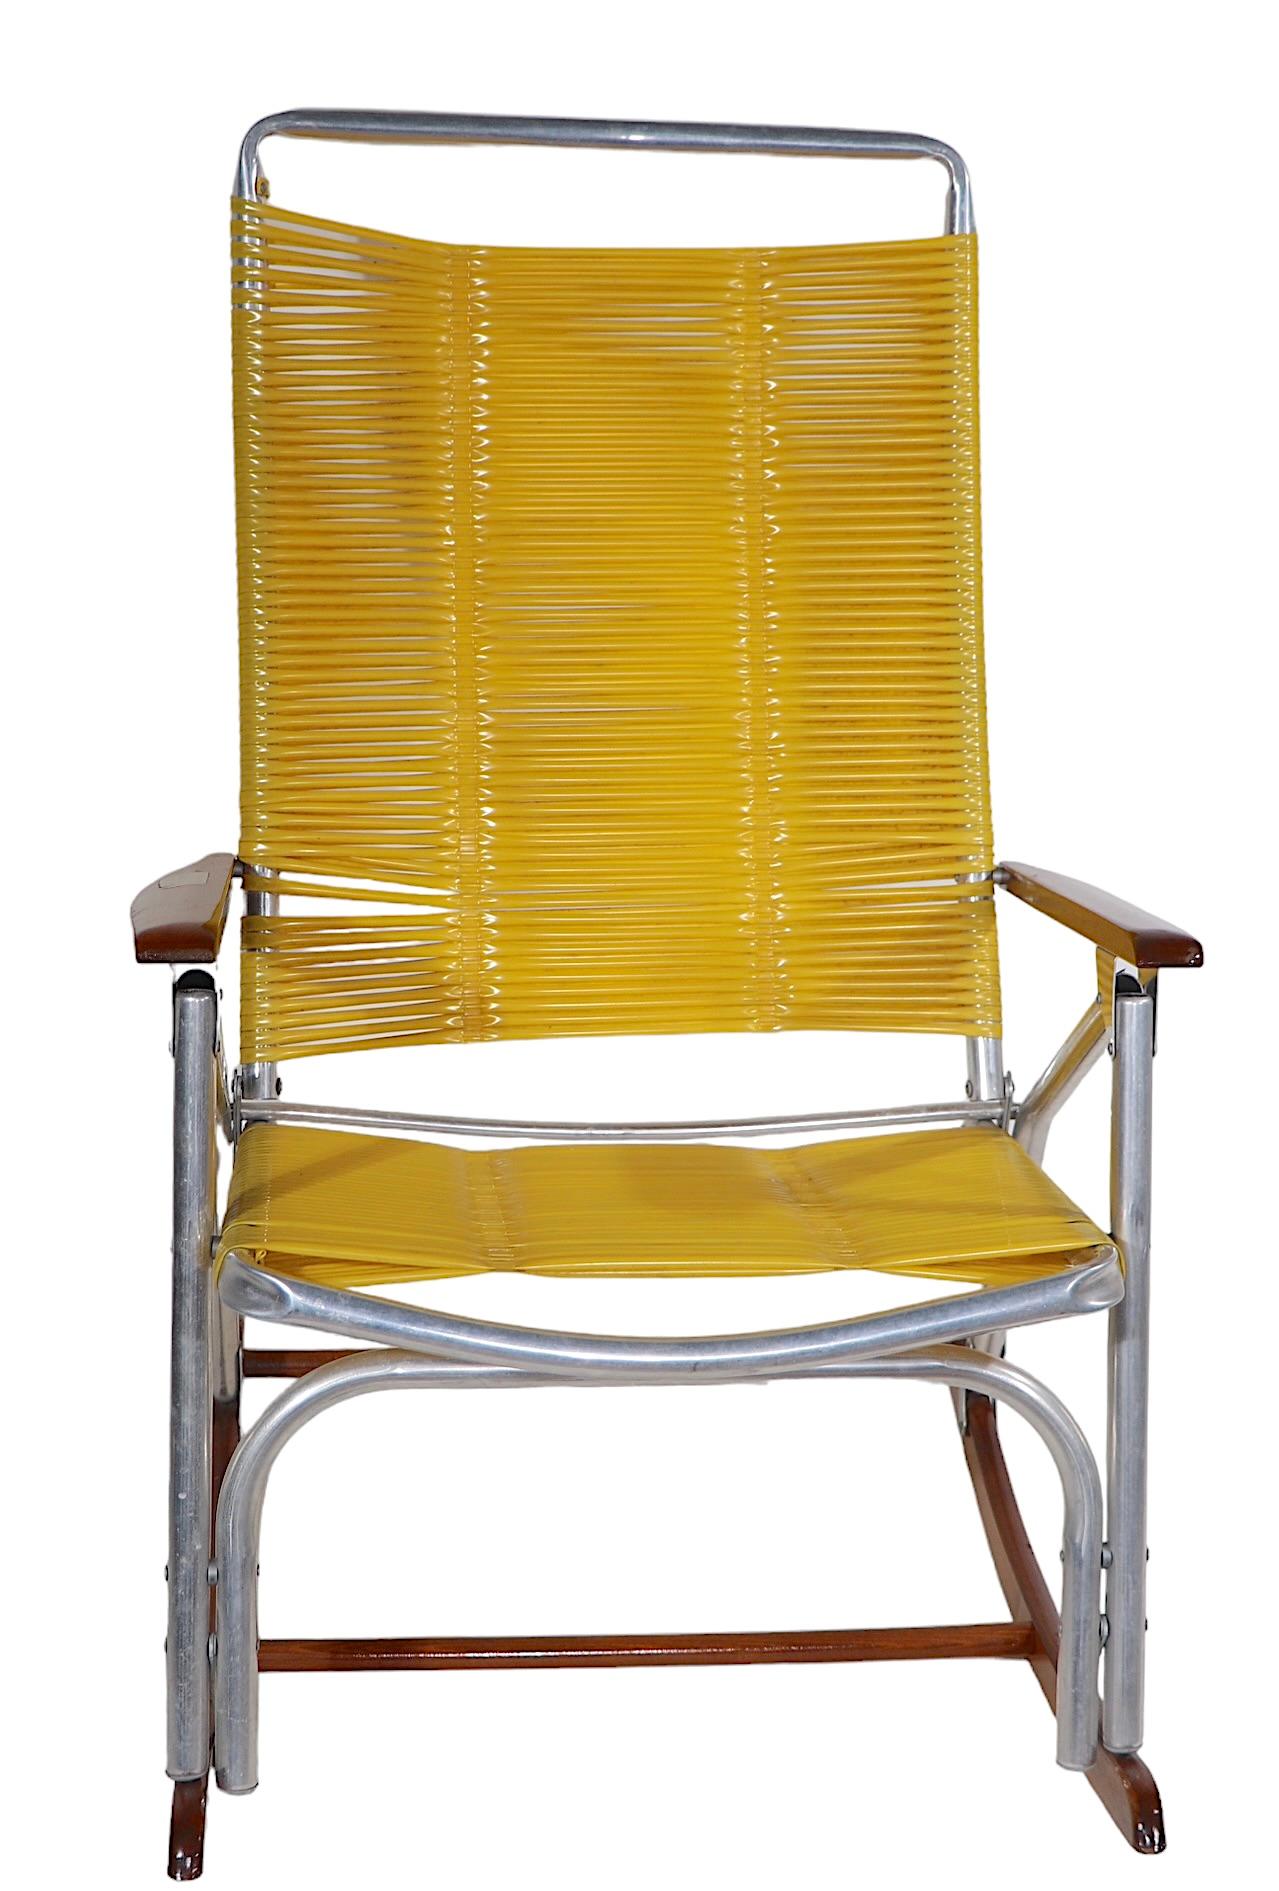 20th Century Mid Century Patio Poolside   Rocking Chair by The Telescope Furniture Company  For Sale